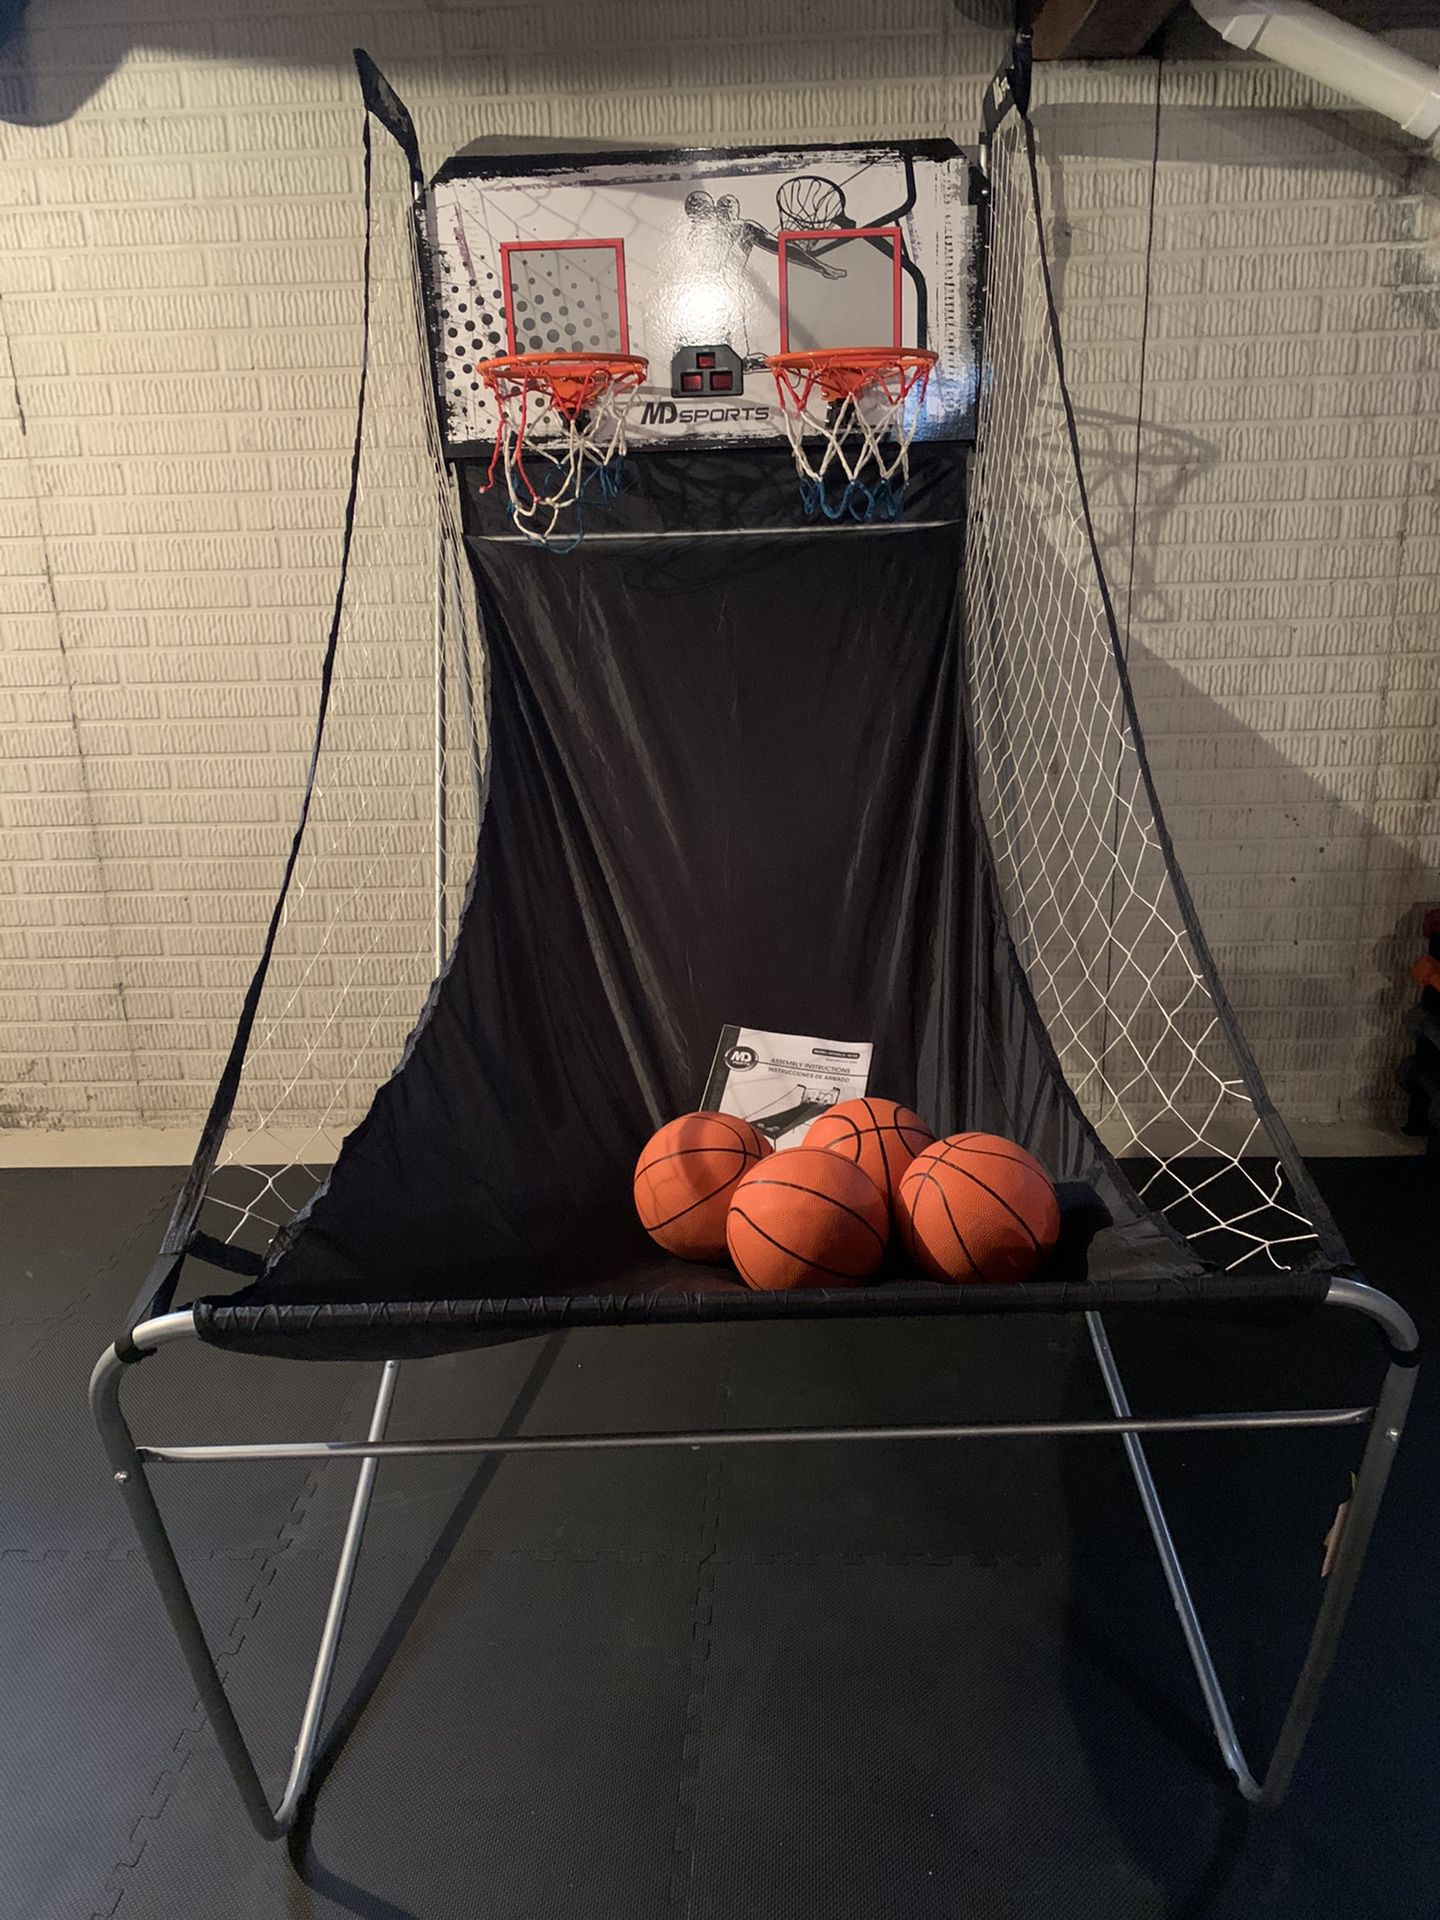 MD Sports 2 player Basketball hoop